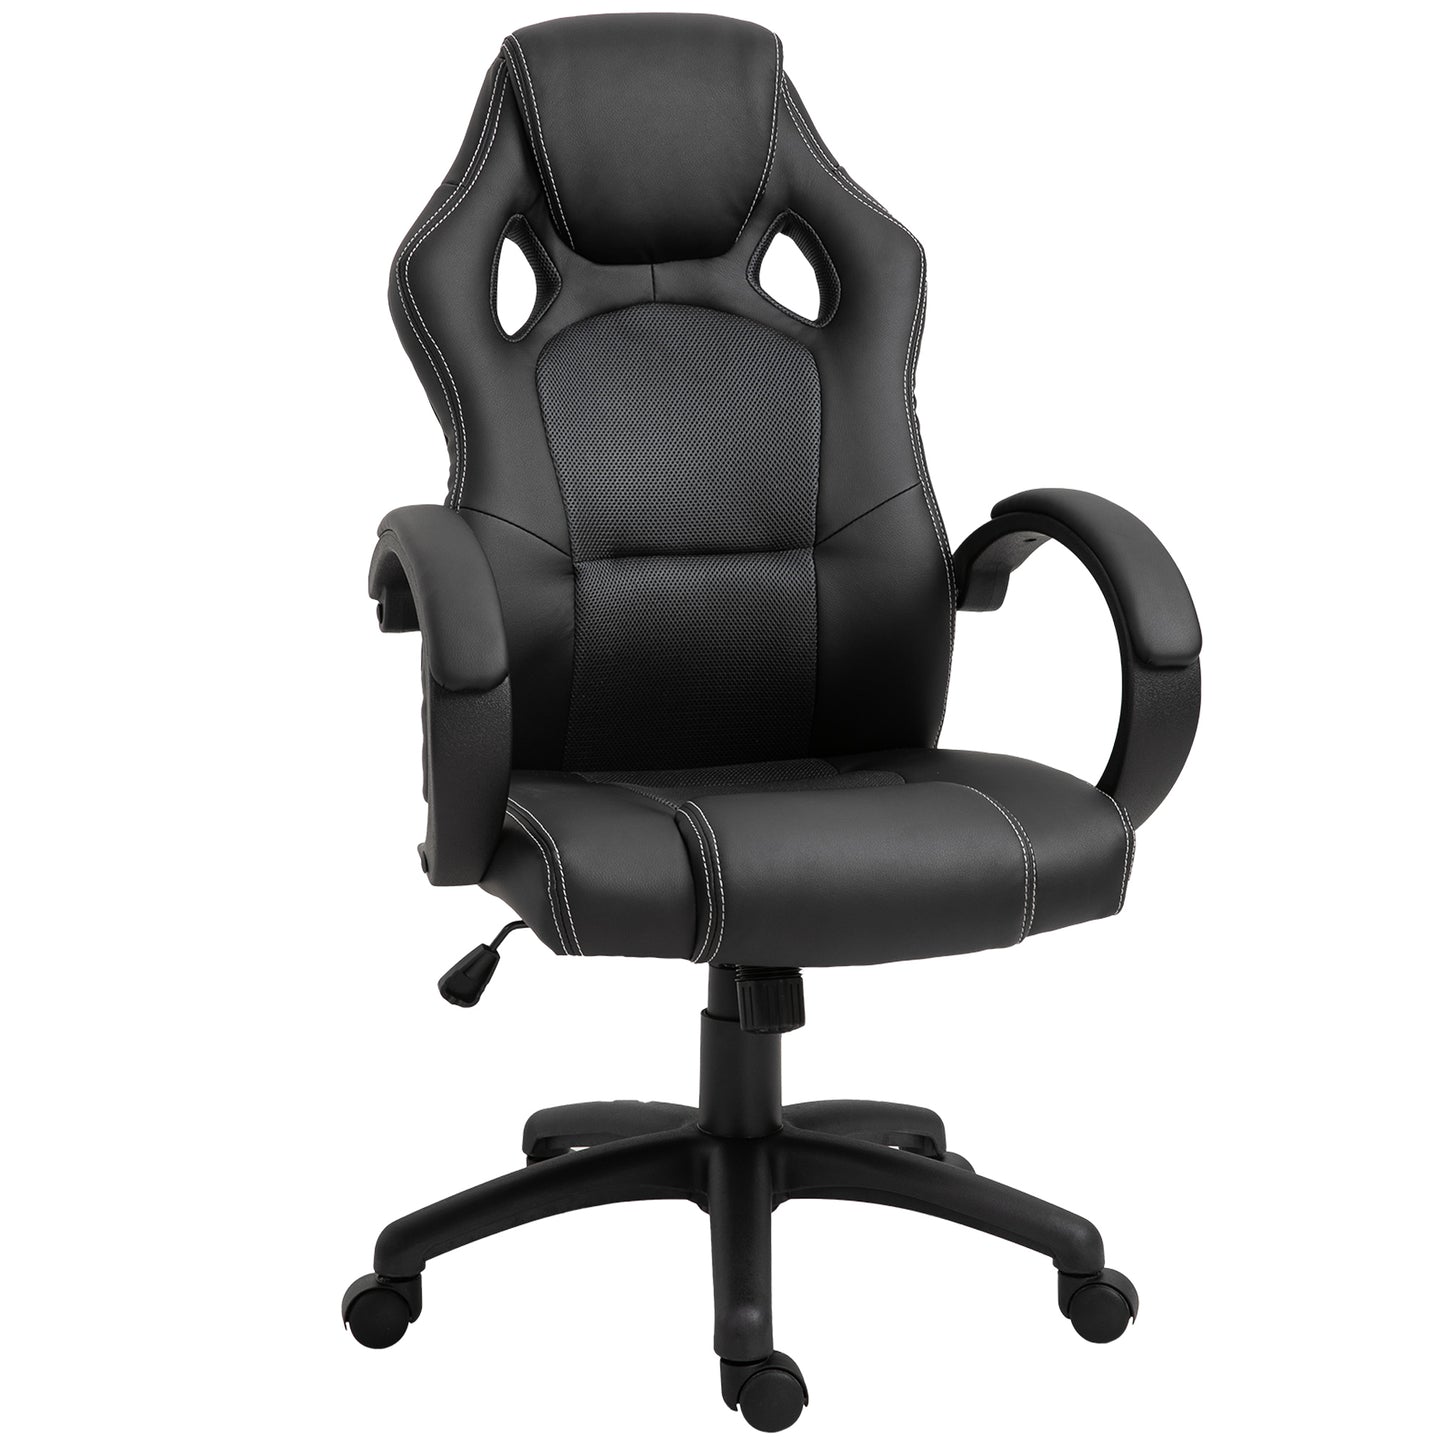 HOMCOM Racing Chair Gaming Sports Swivel PU Leather Office PC Chair Height Adjustable-Black/Grey